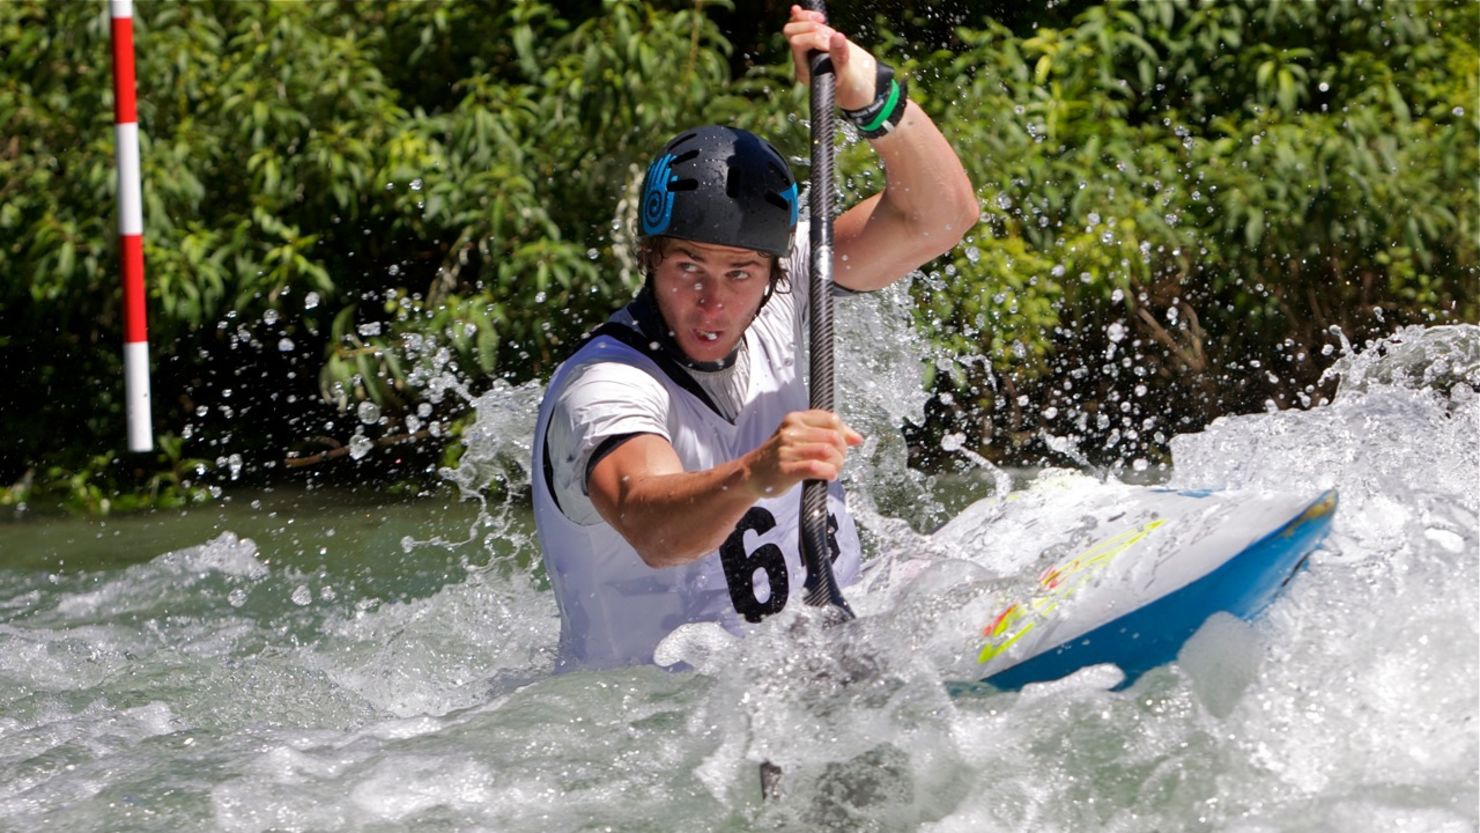 New Zealand kayaker to be judged by mom at Olympics